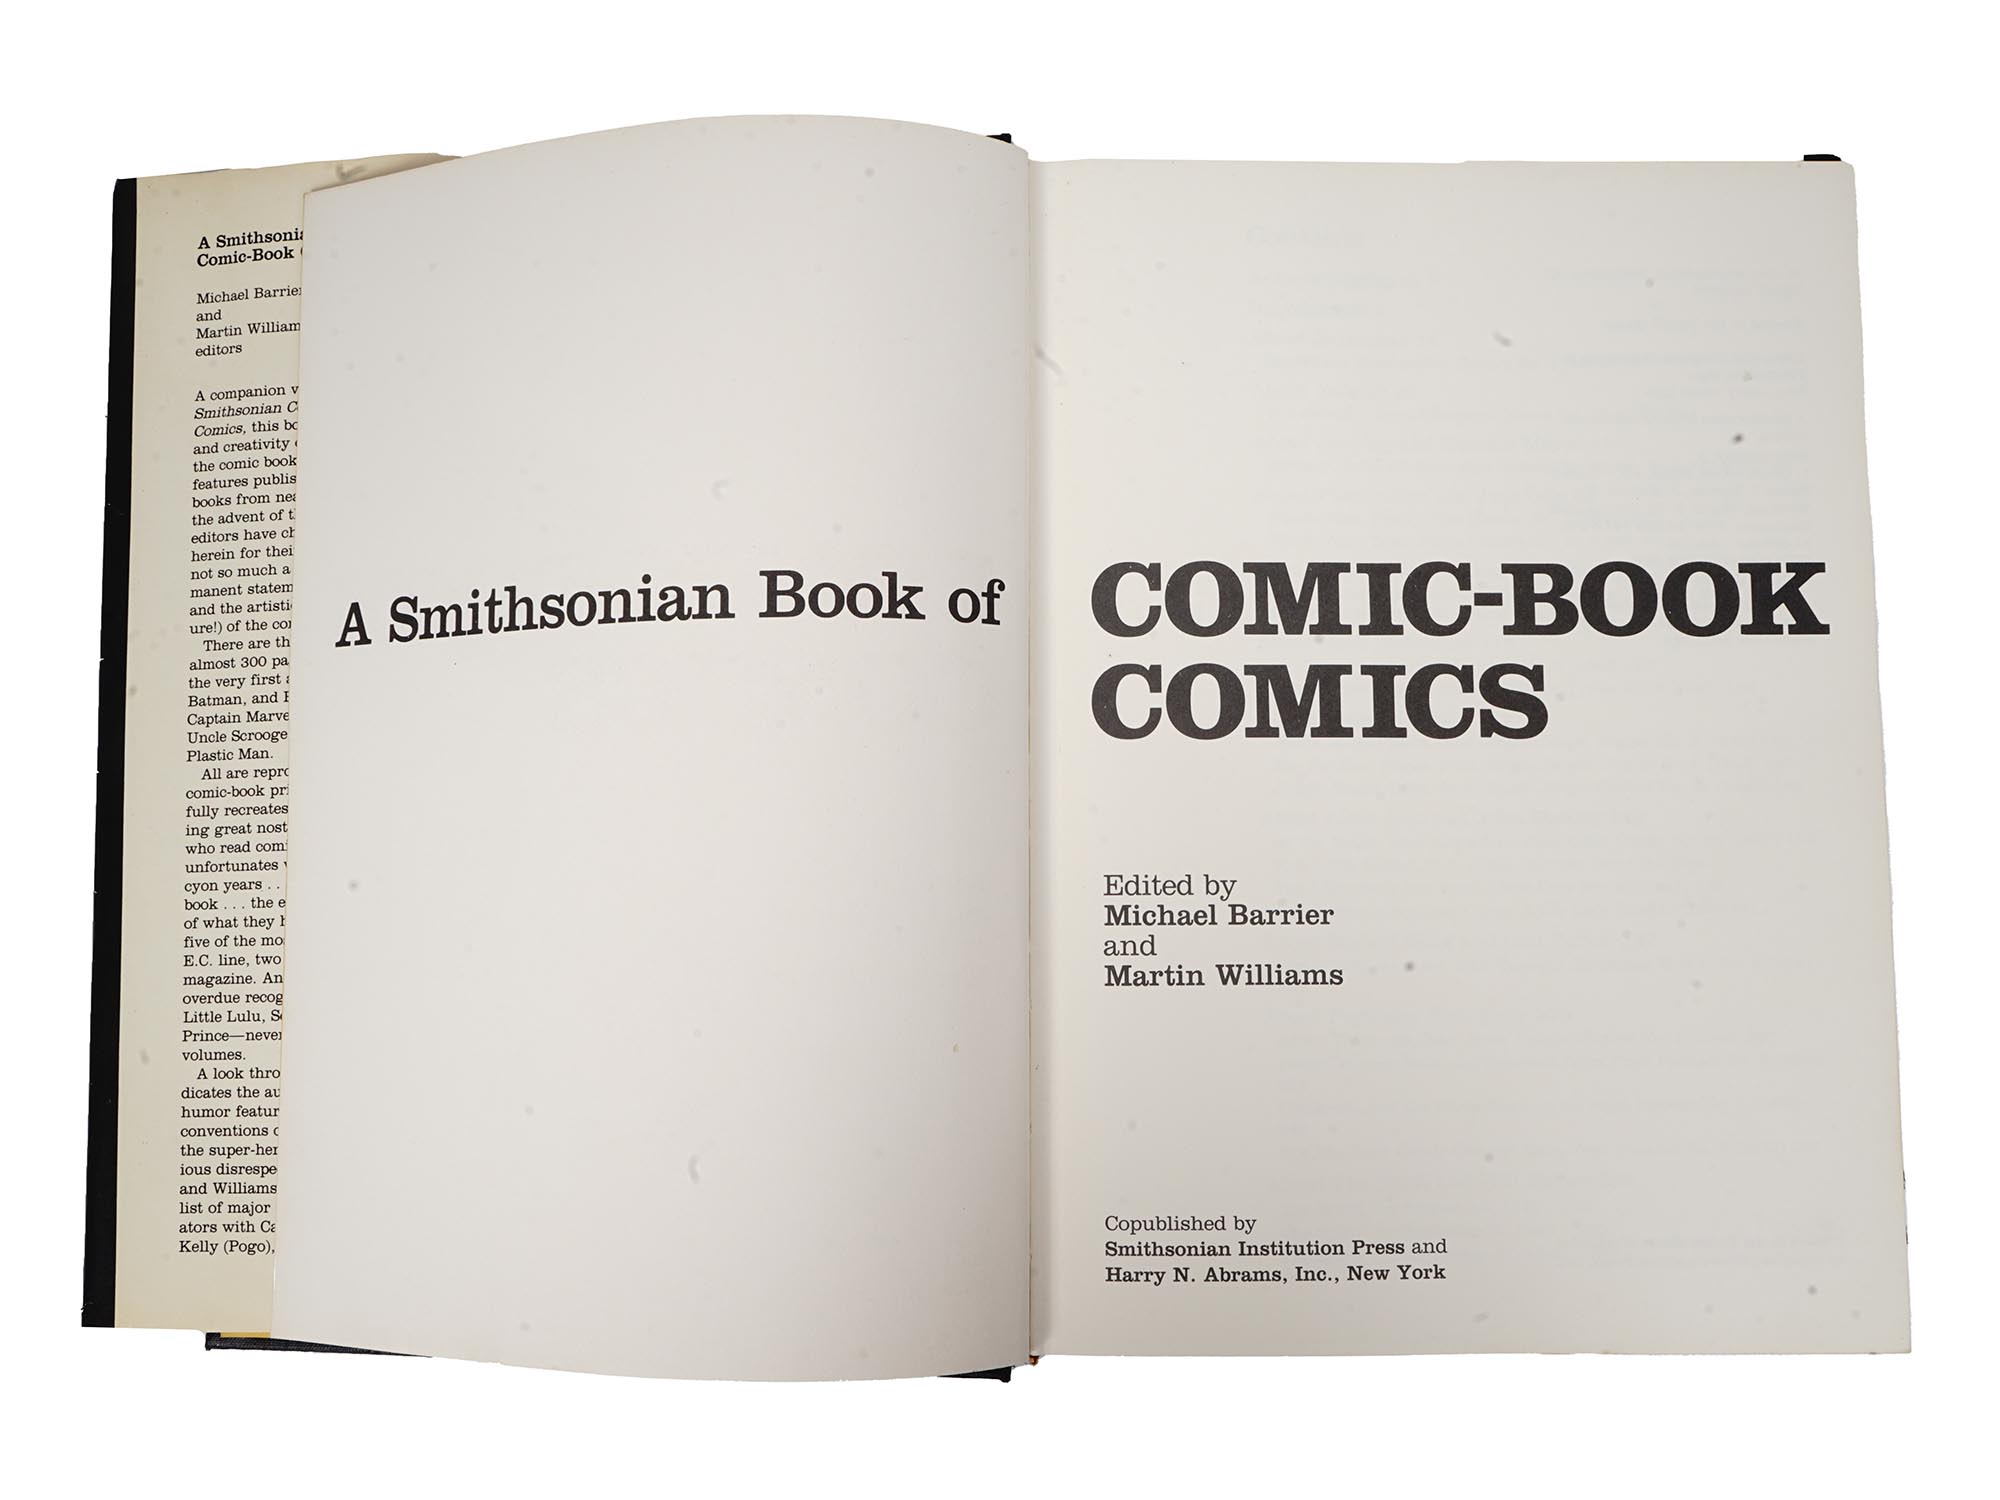 SMITHSONIAN BOOK OF COMICS AND SUPERMAN DRAWING PIC-4